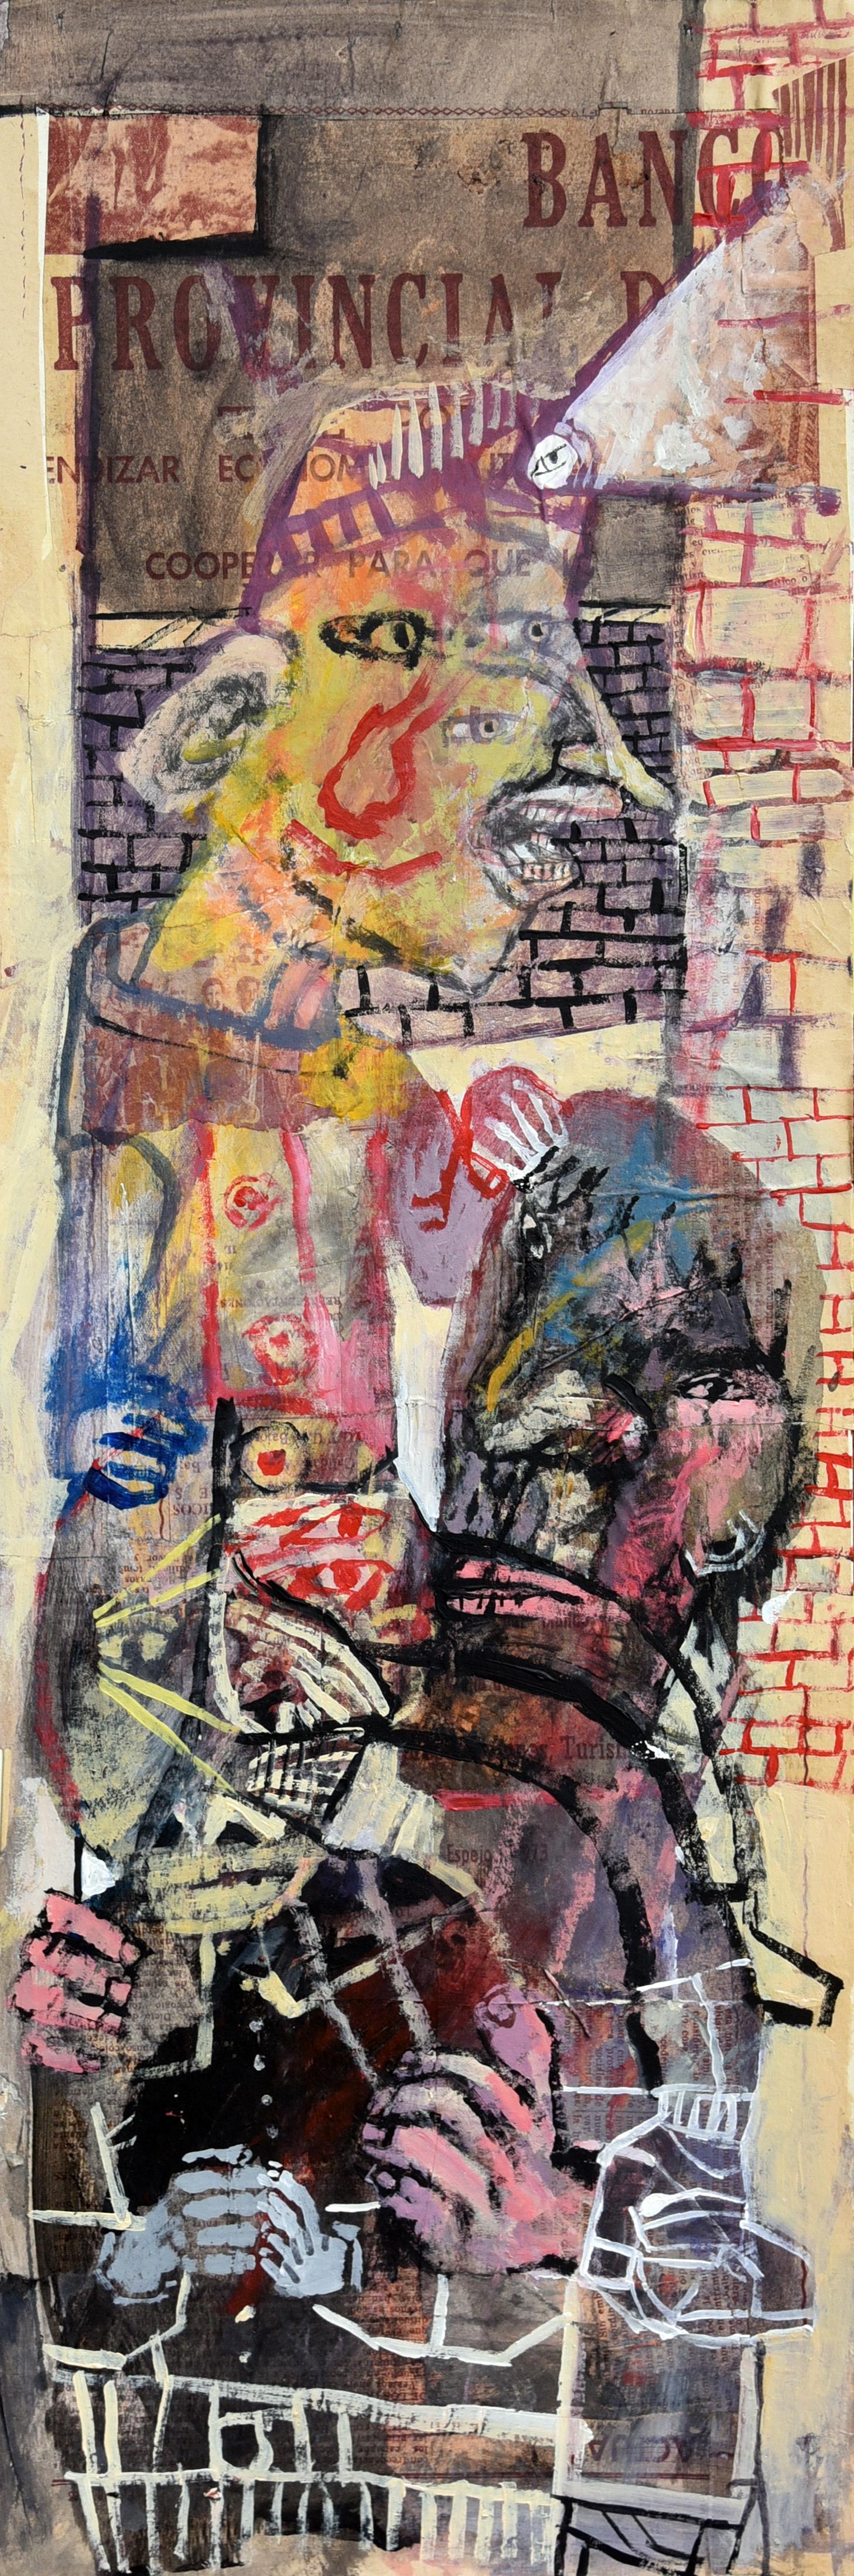 Acrylic paint, ink and collage on paper
Hand-signed by the artist